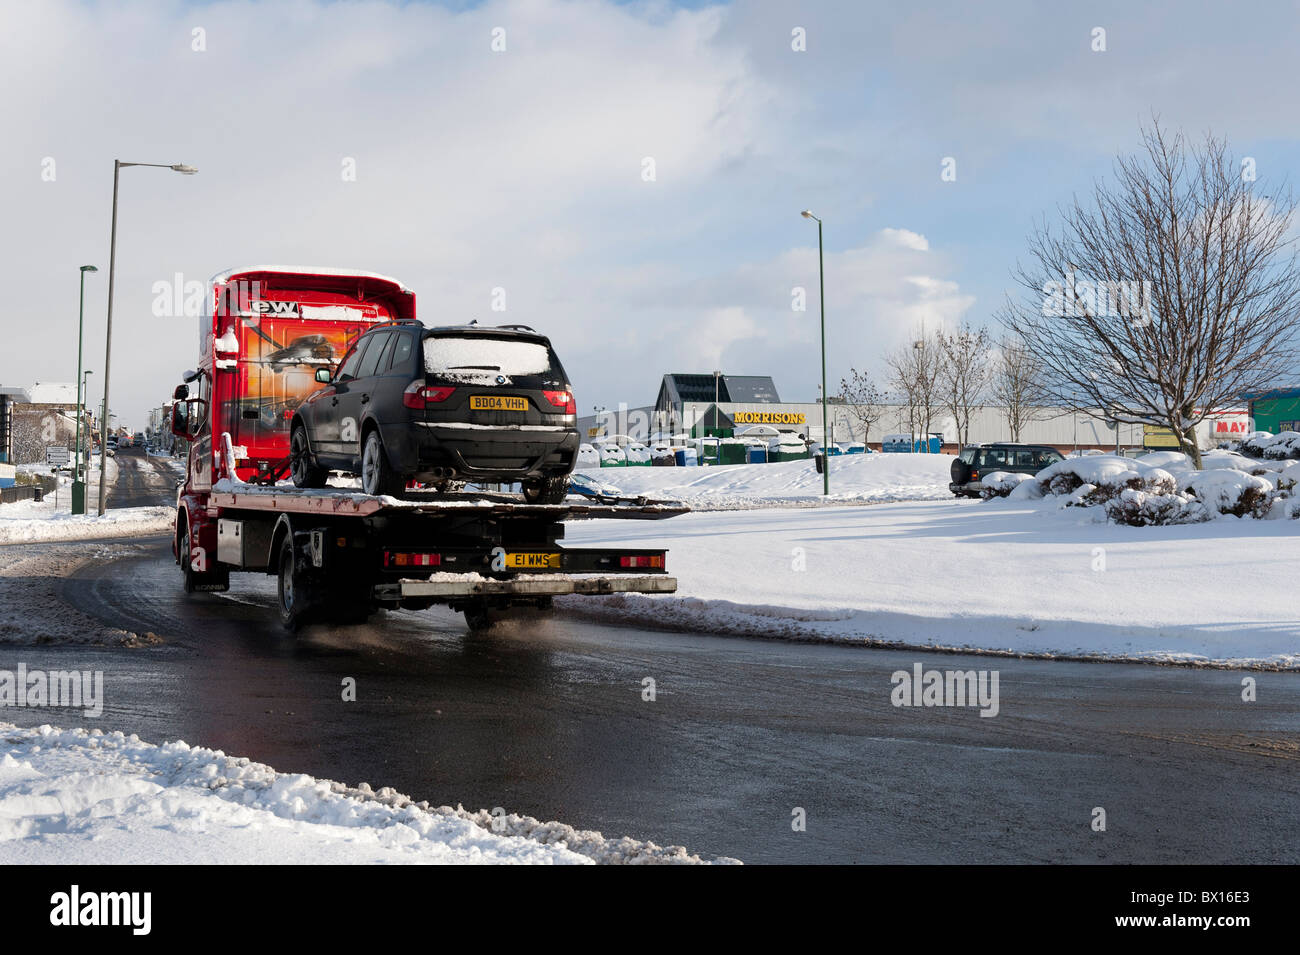 Car being transported on back of a lorry. Stock Photo